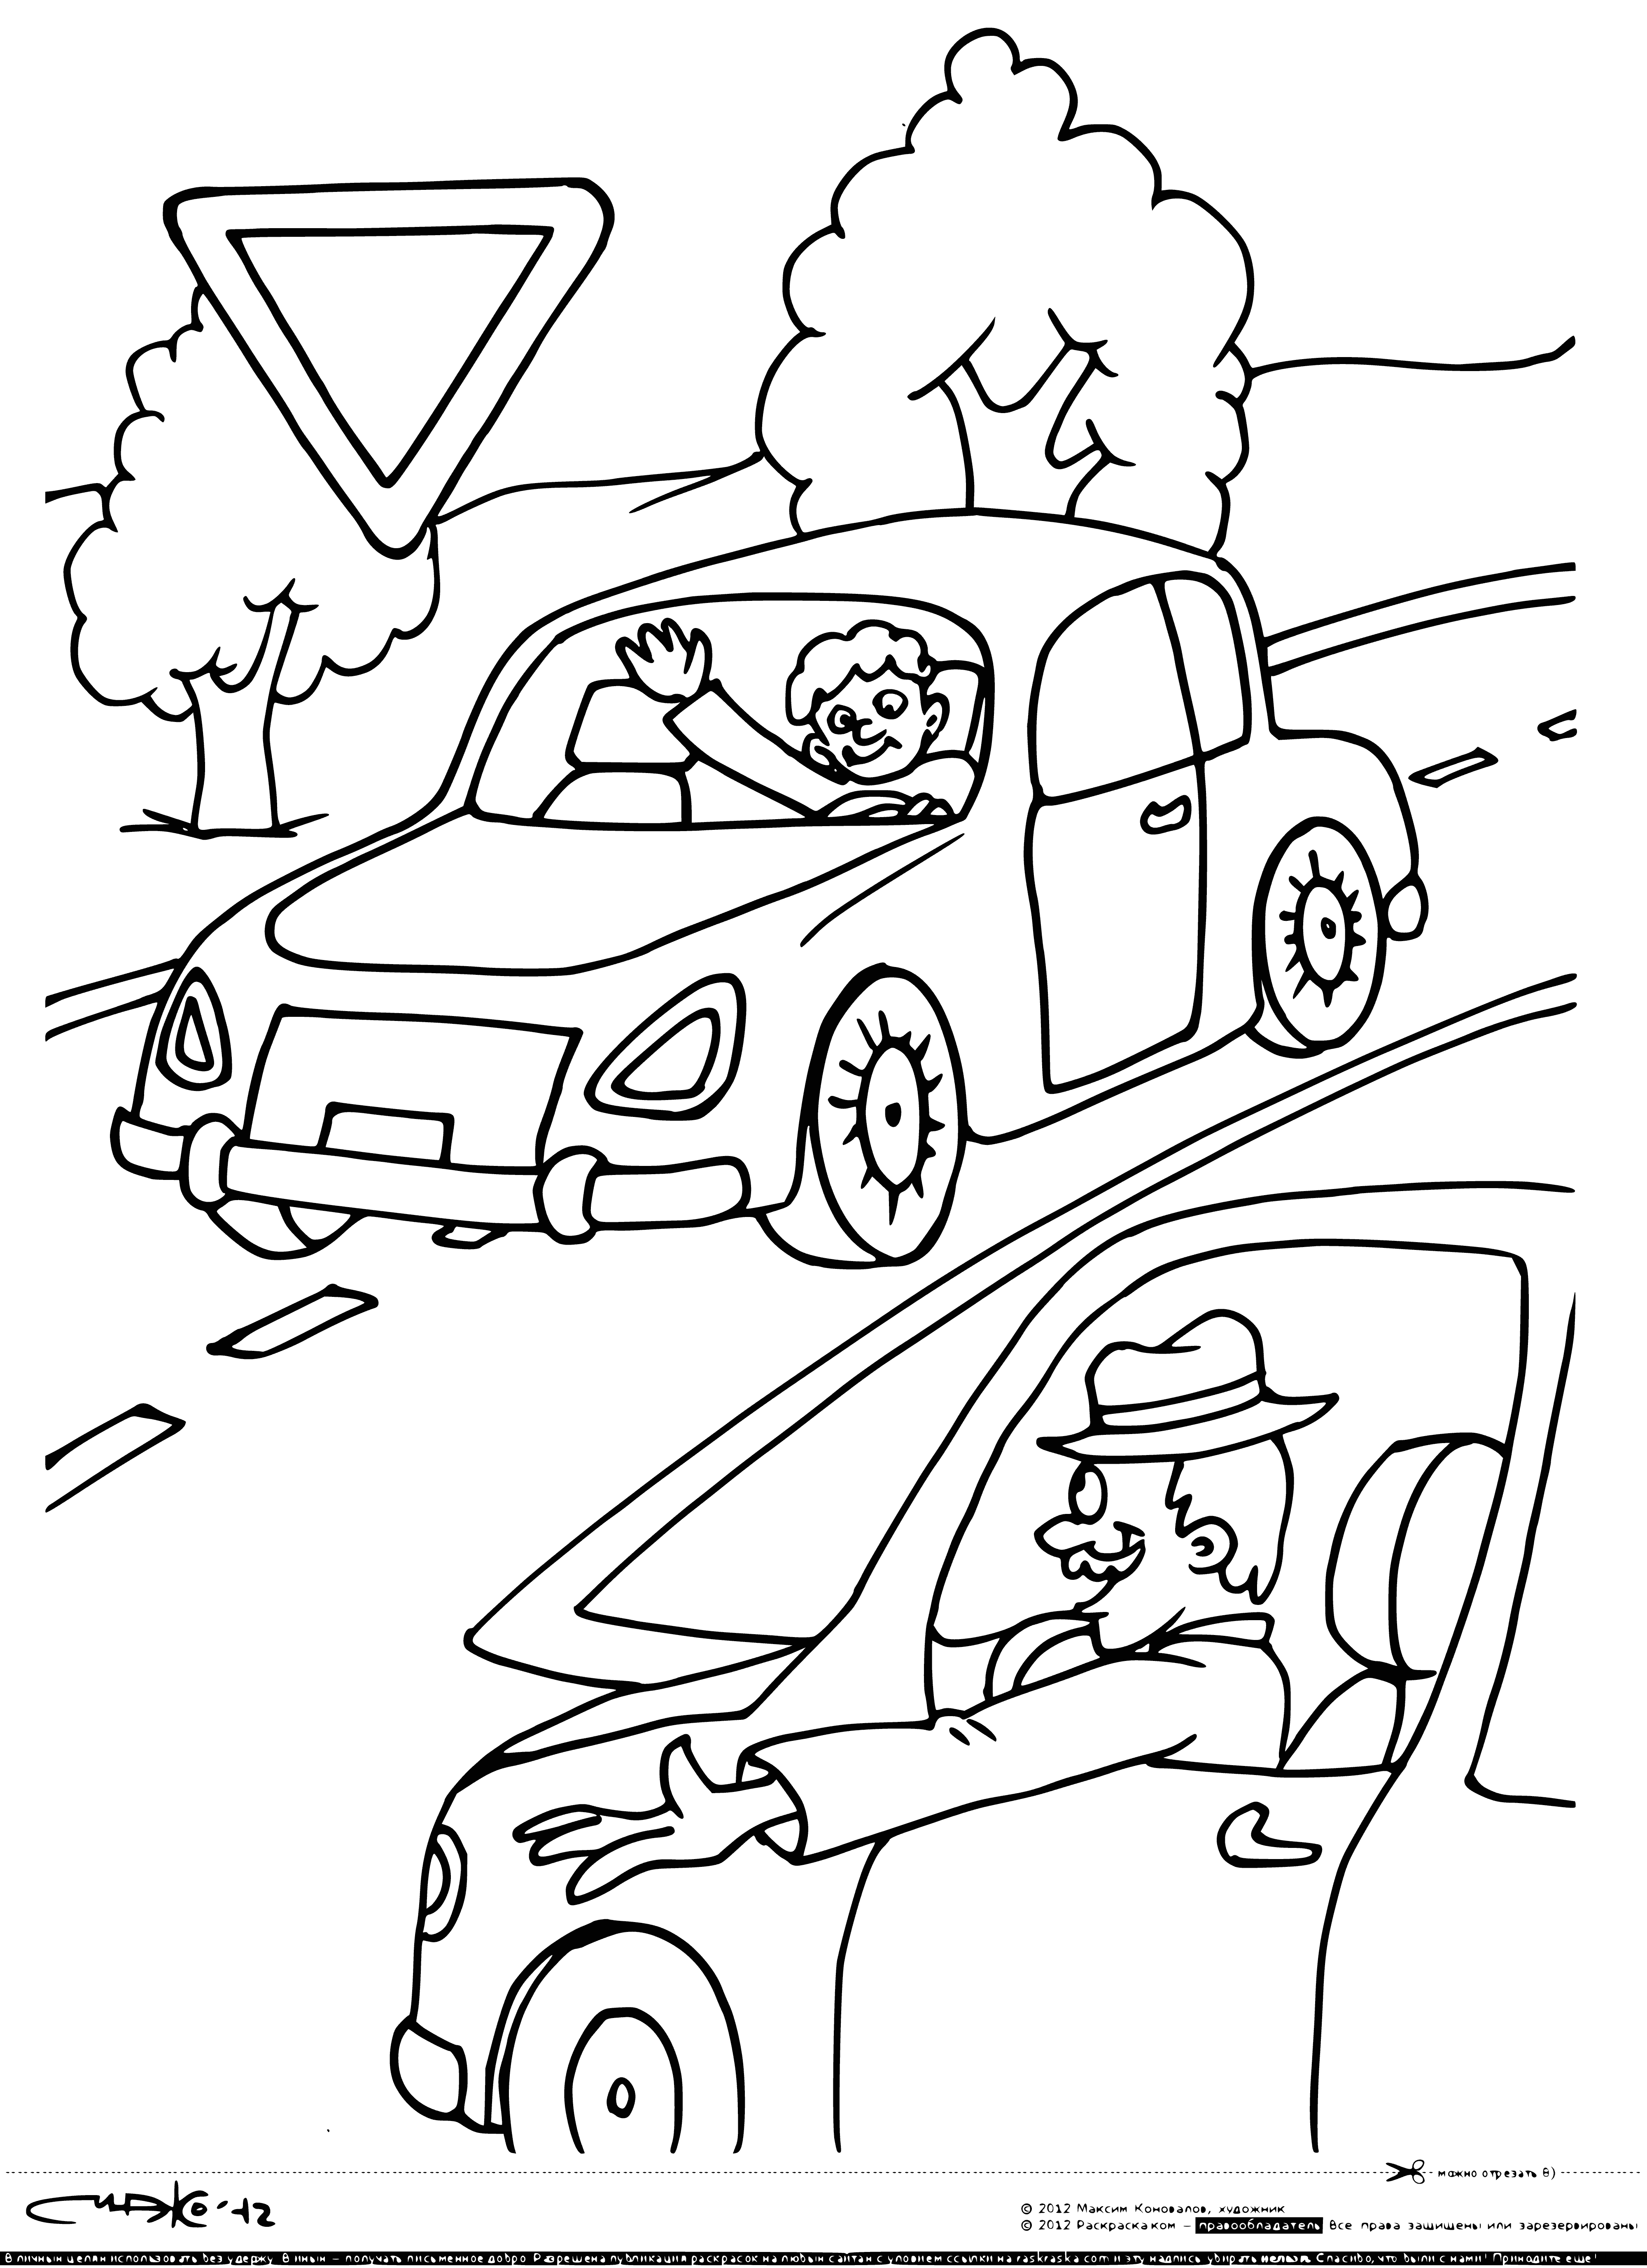 coloring page: Sign with red circle & slash means yield to oncoming traffic.